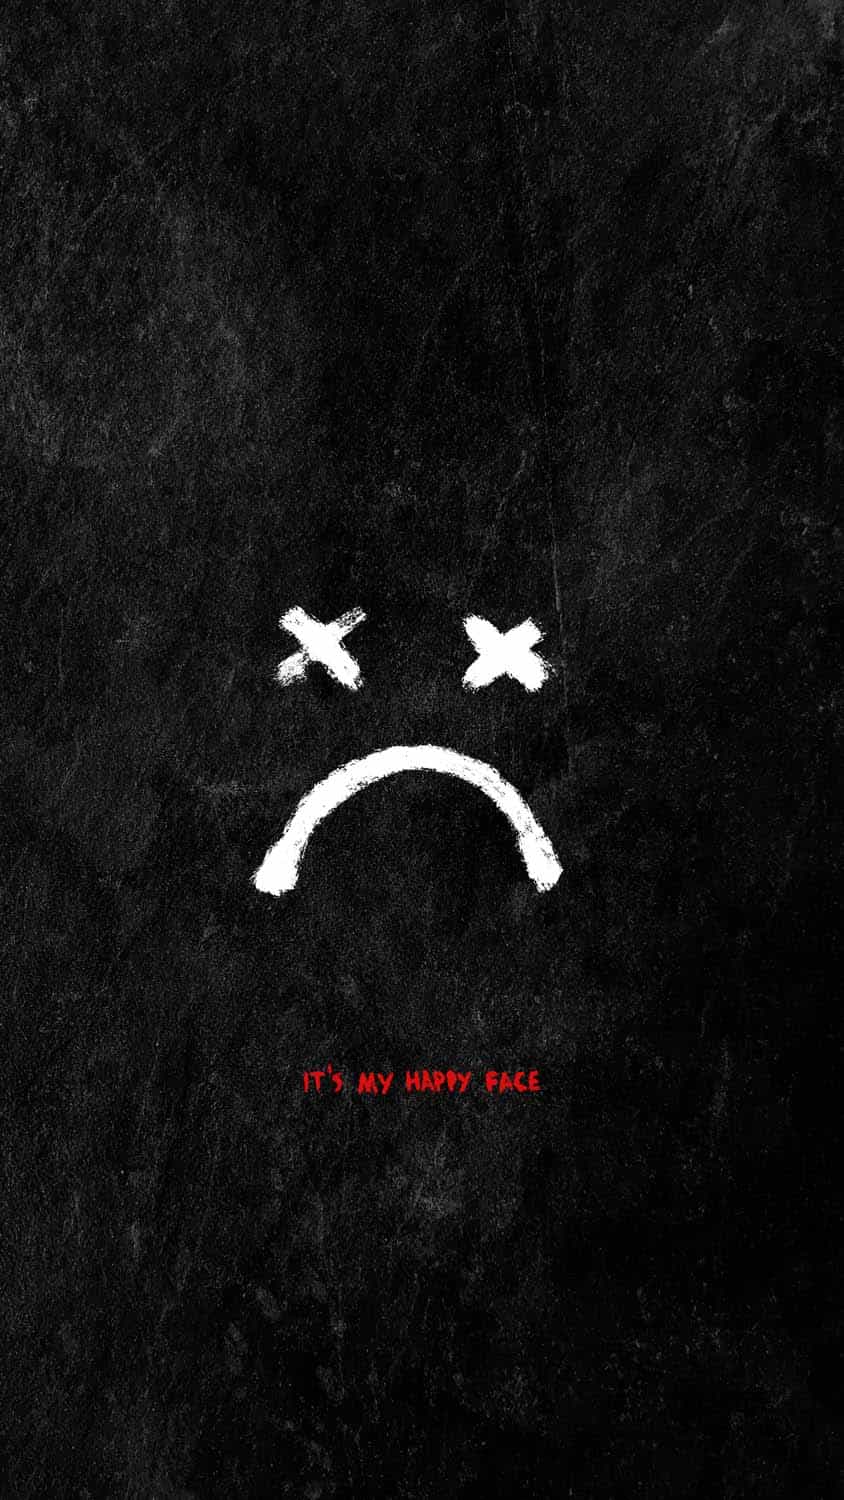 My Happy Face iPhone Wallpaper 4K